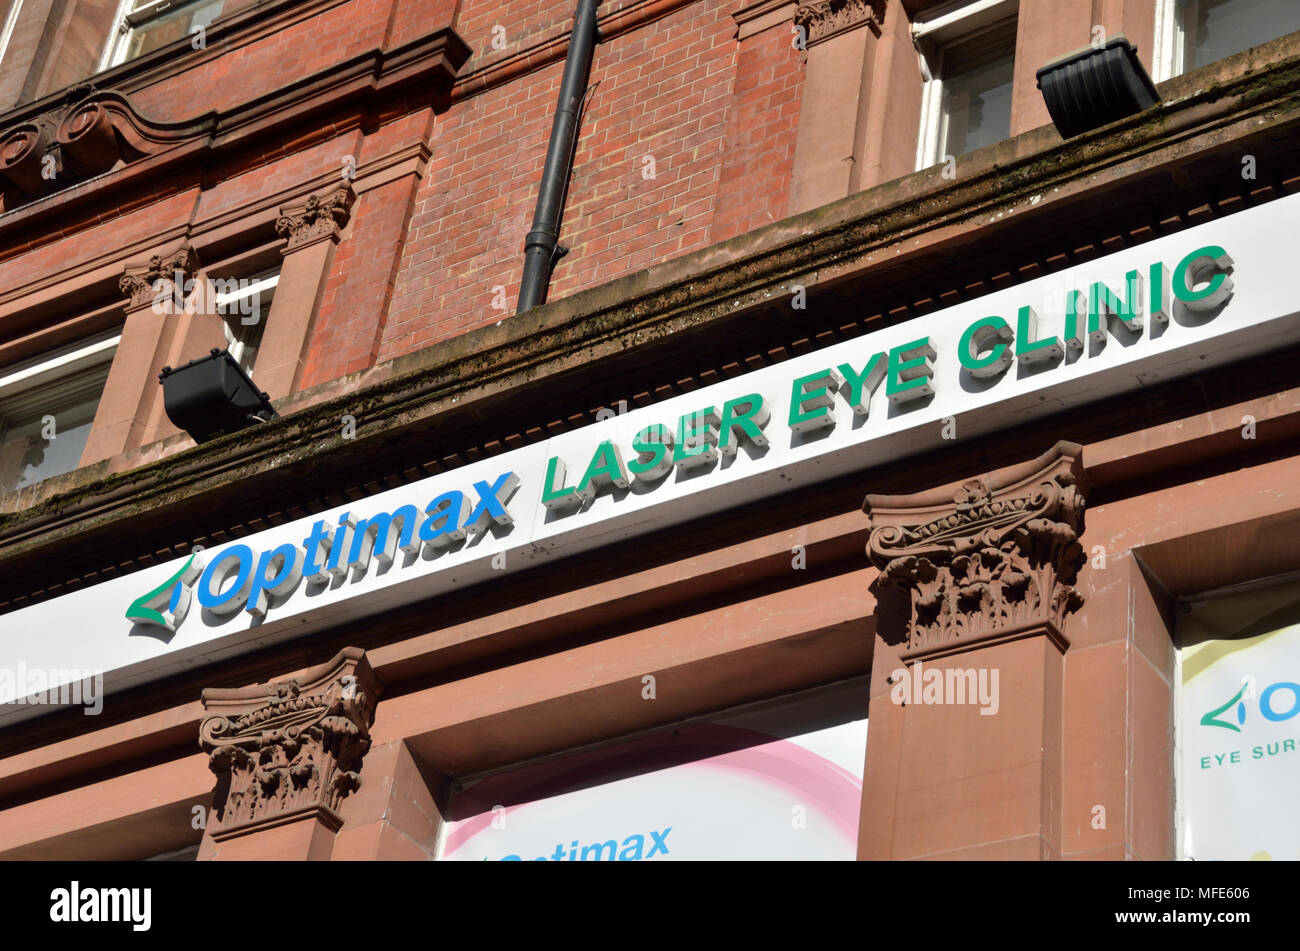 Optimax Laser Eye Clinic in Finchley Road NW3, London, UK Stock Photo -  Alamy